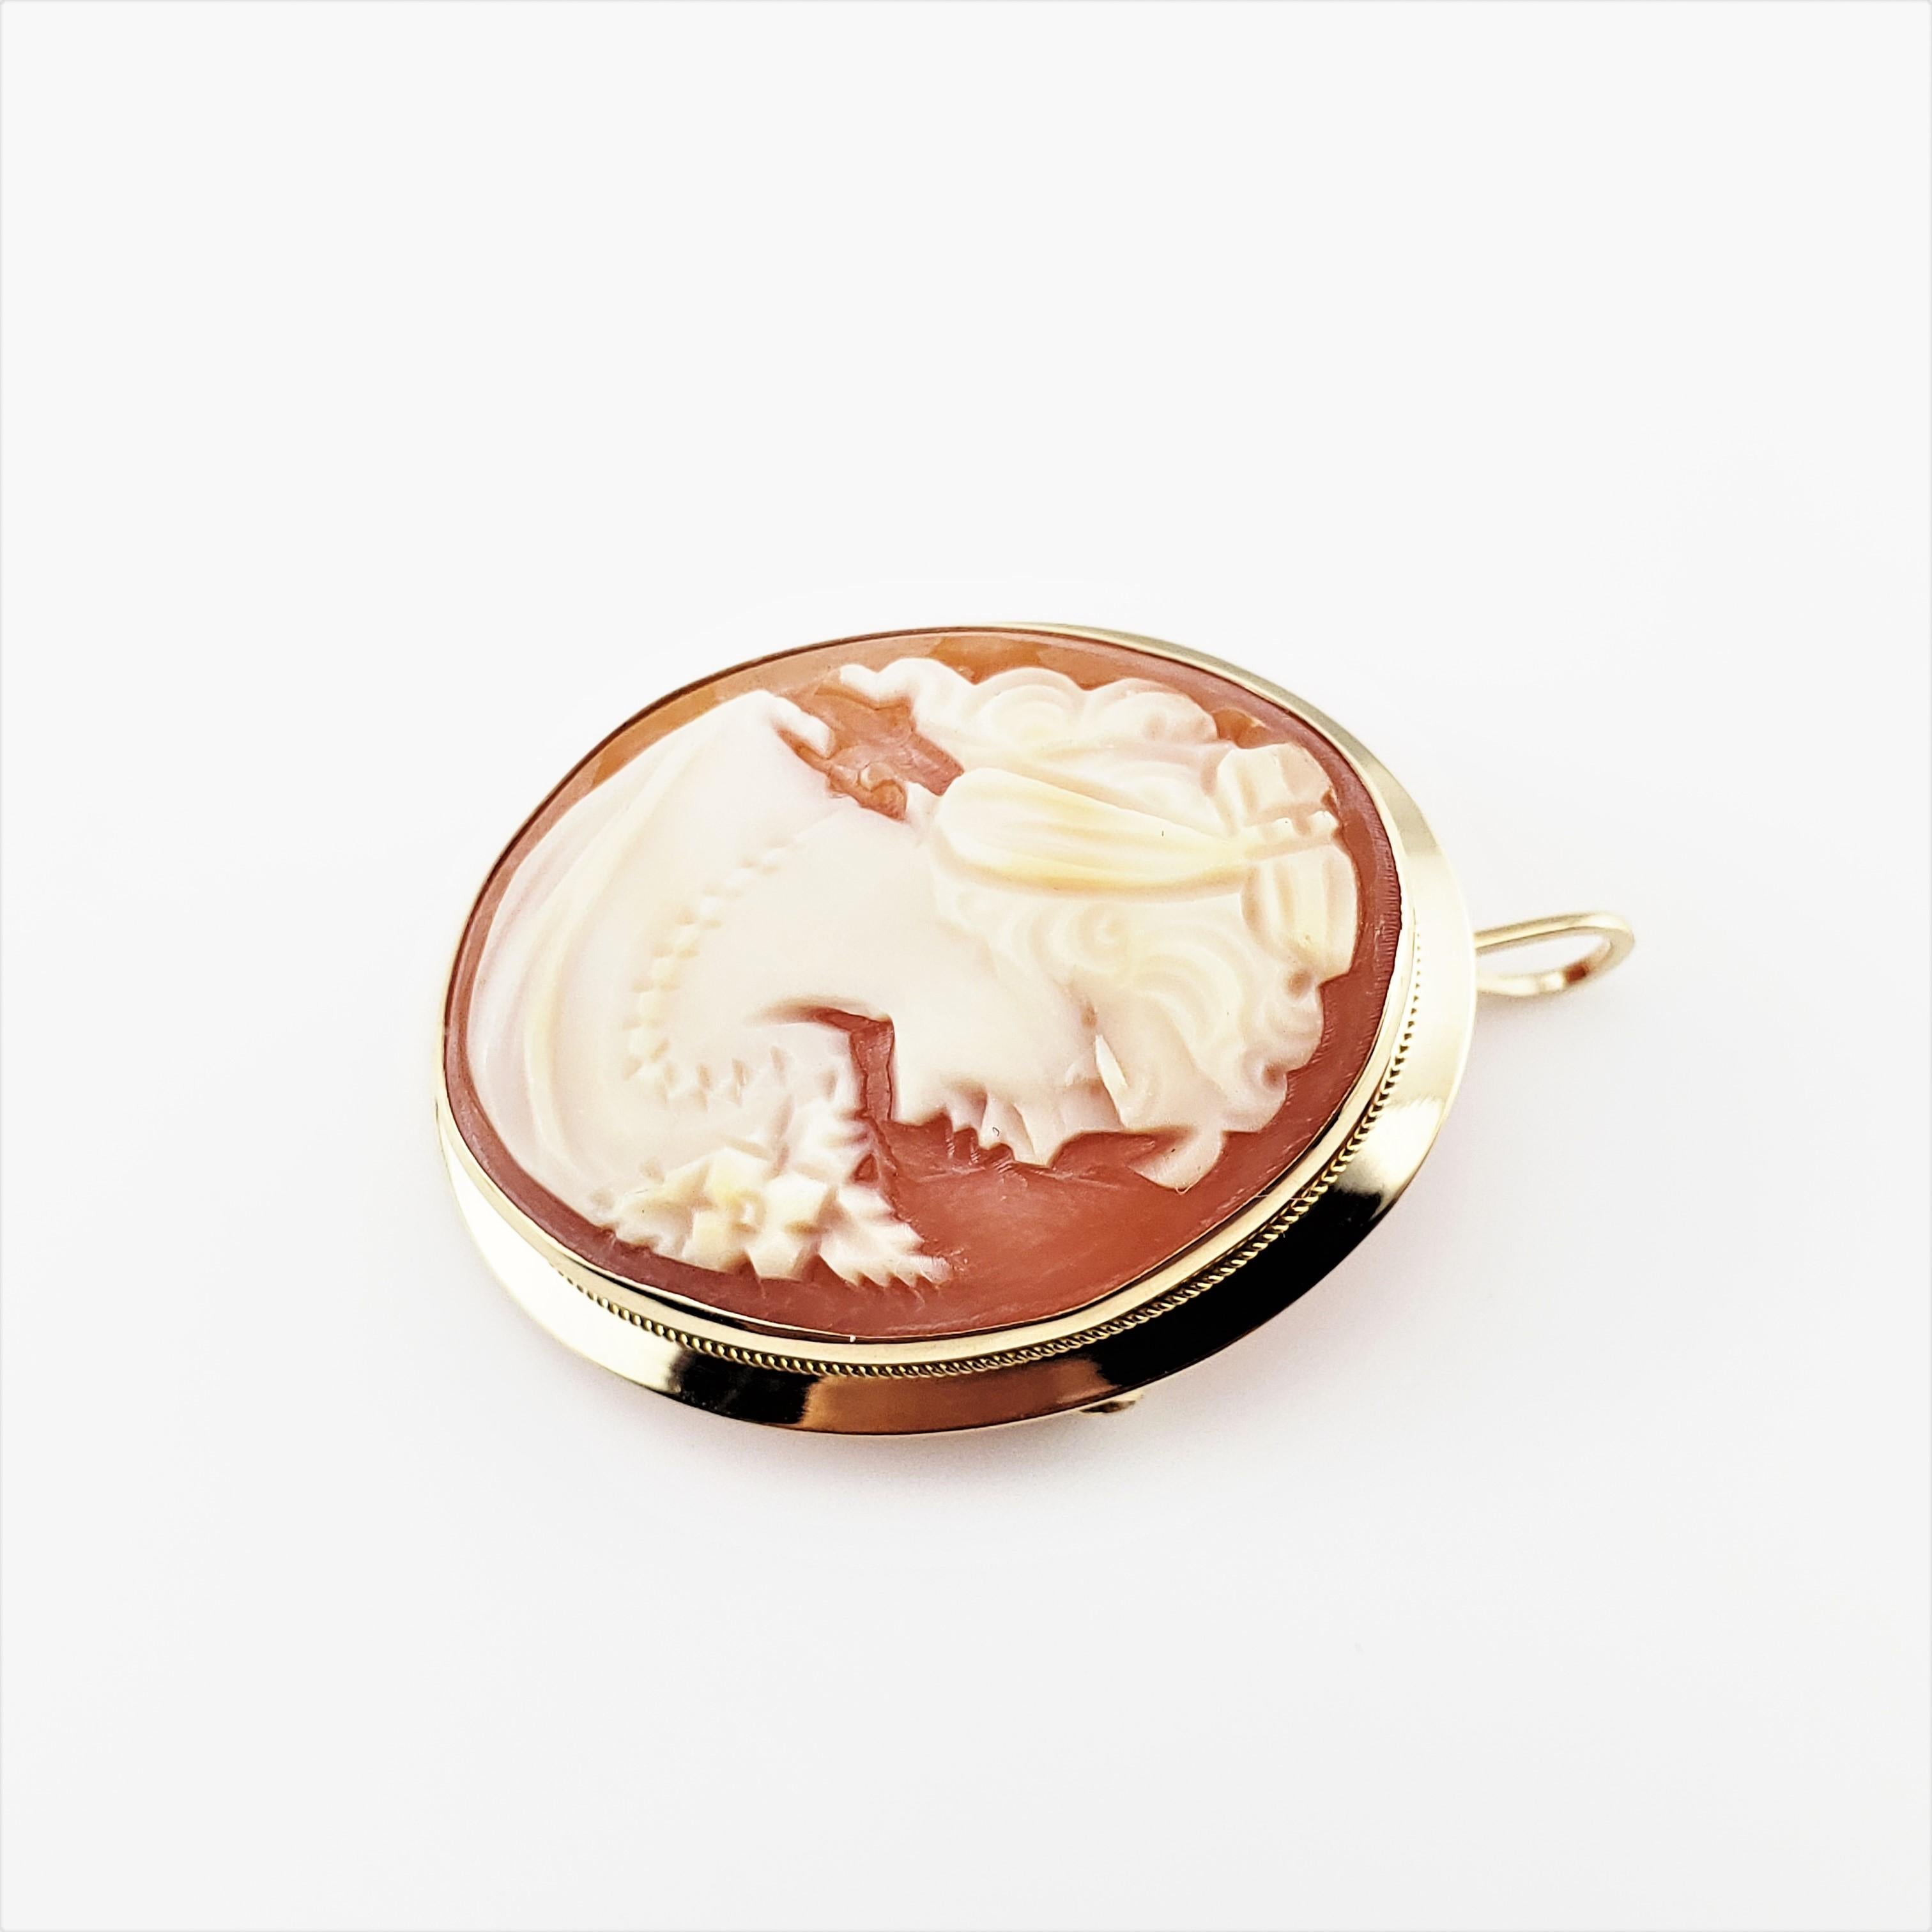 14 Karat Yellow Gold Cameo Brooch/Pendant-

This elegant cameo features a lovely lady in profile framed in beautifully detailed 14K yellow gold.  Can be worn as a brooch or a pendant.

*Chain not included

Size:  28 mm x  22 mm

Weight:  2.7 dwt. / 